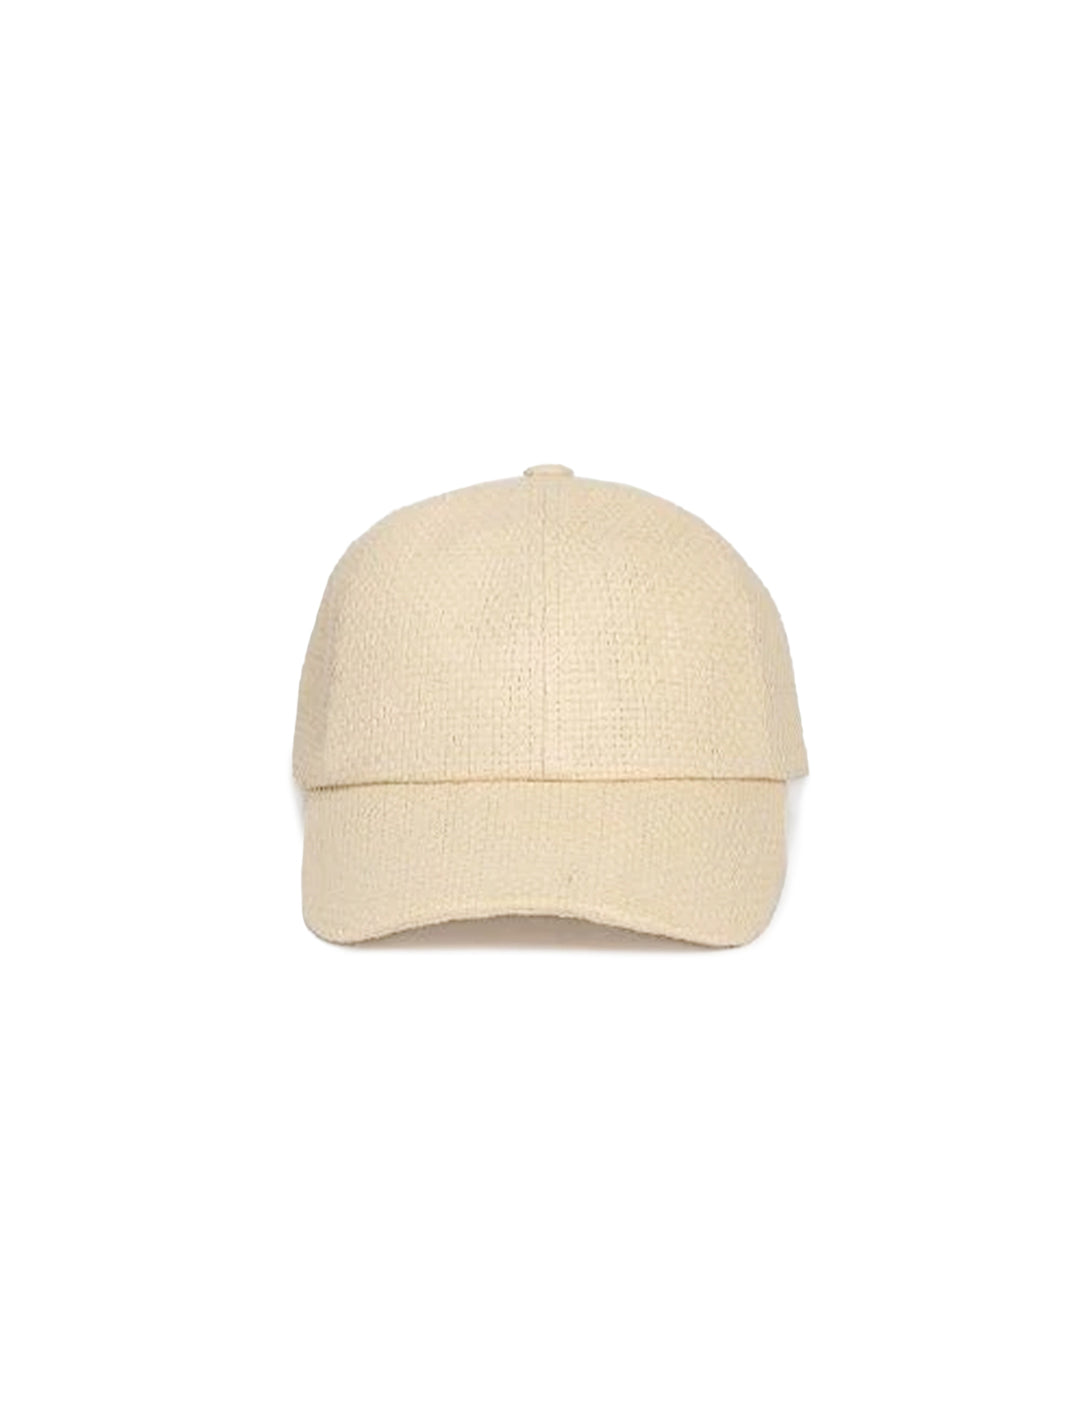 Front view of Hat Attack's beach cap in natural.